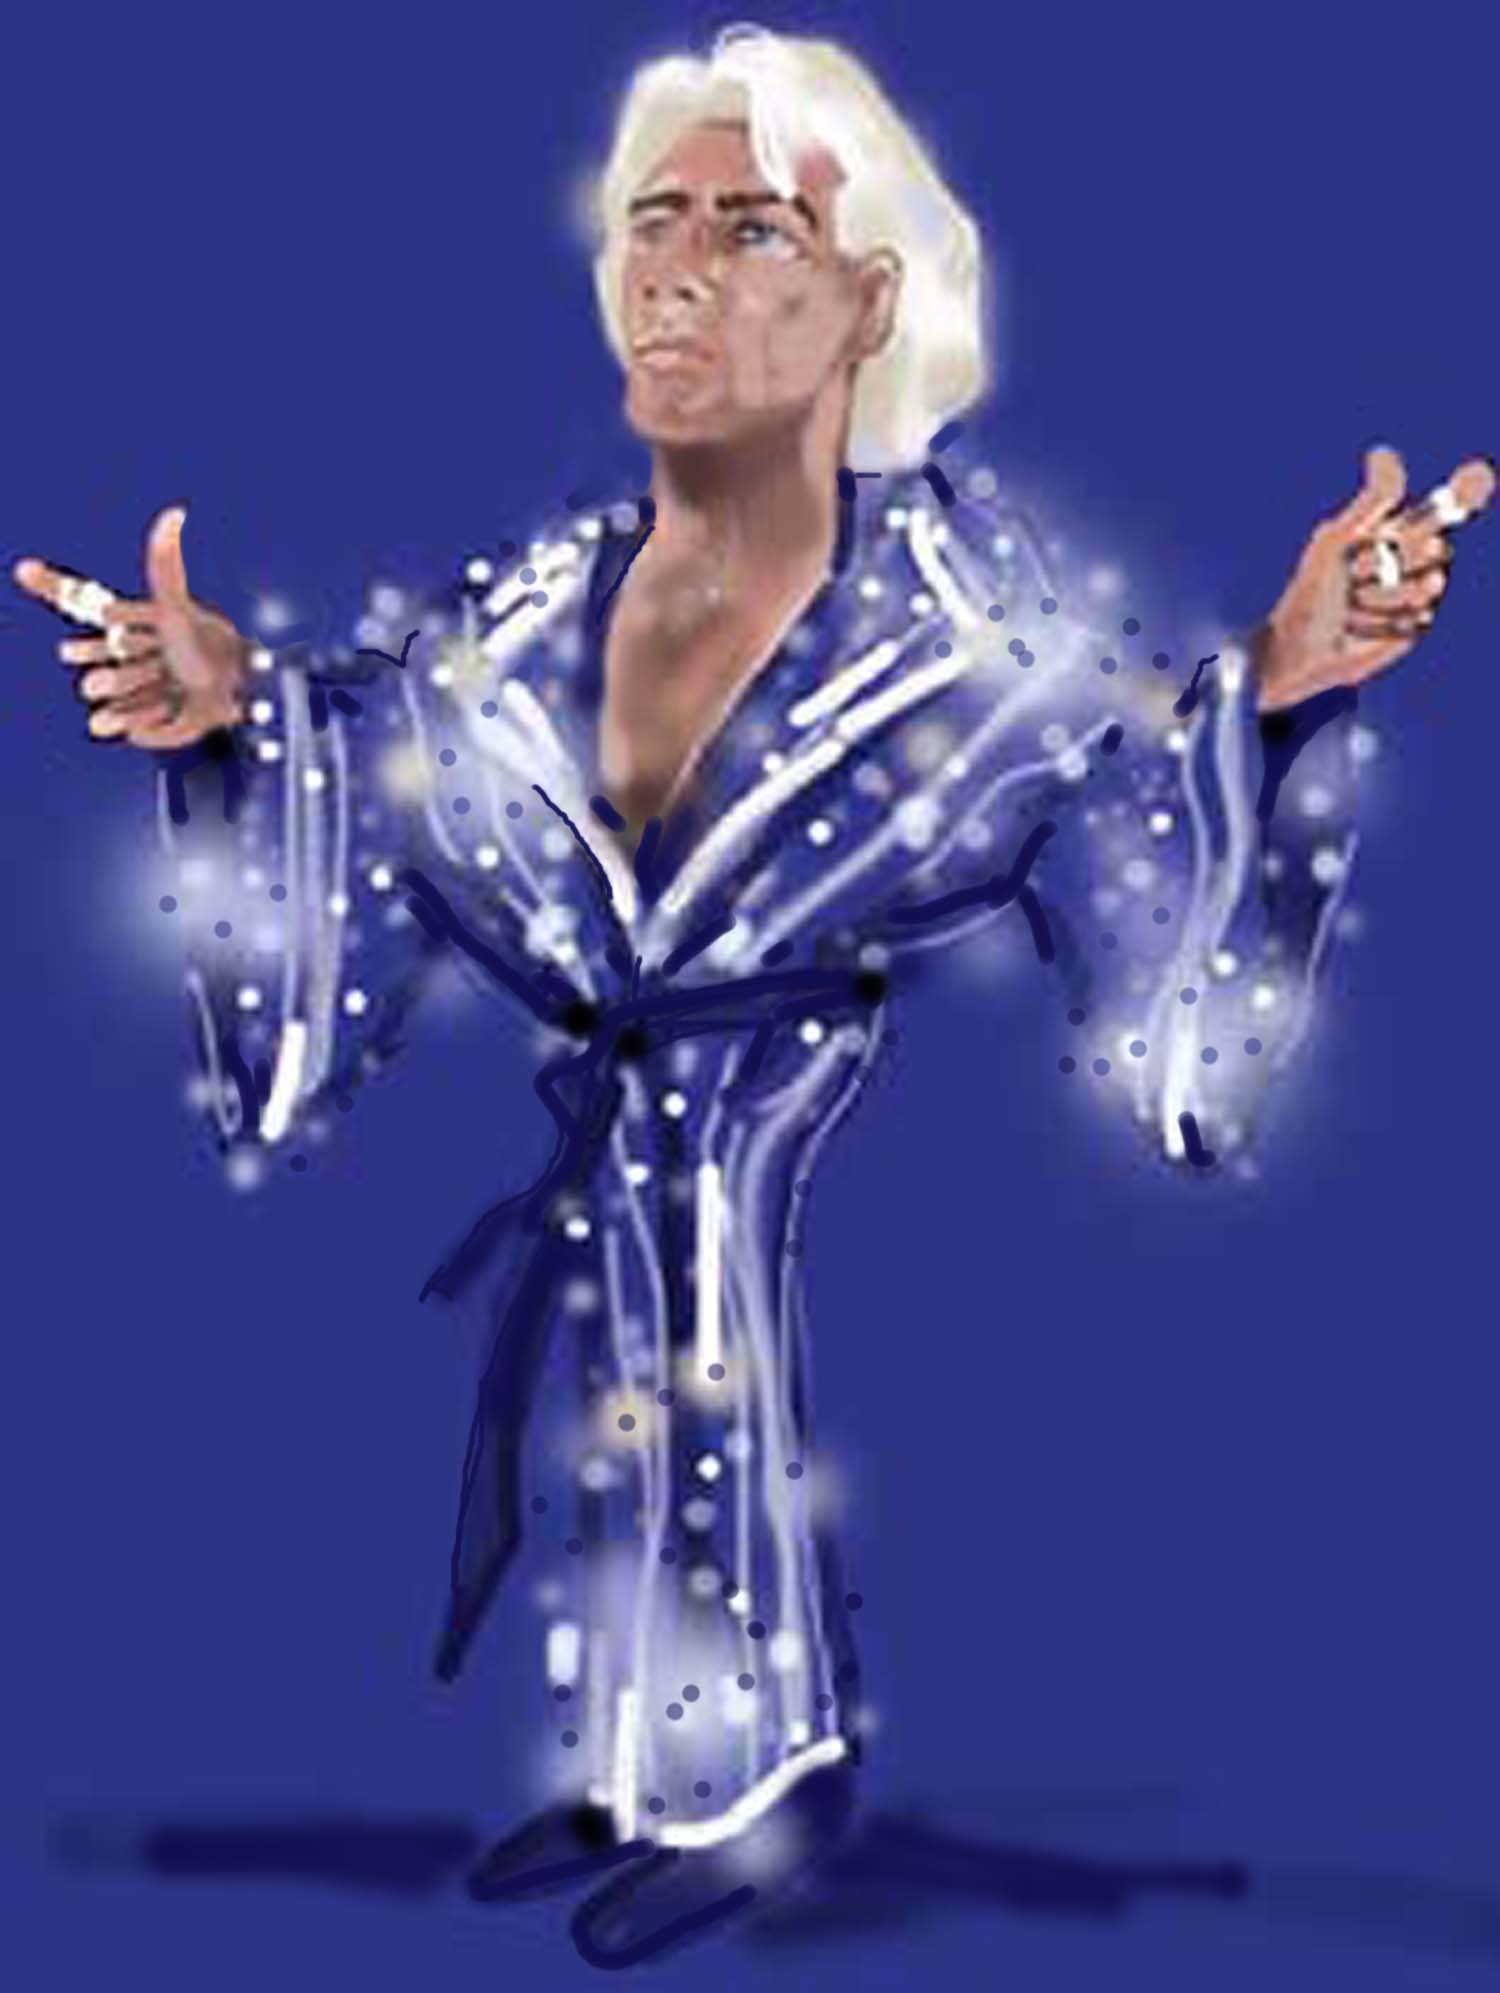 Best Rick Flair Quotes.